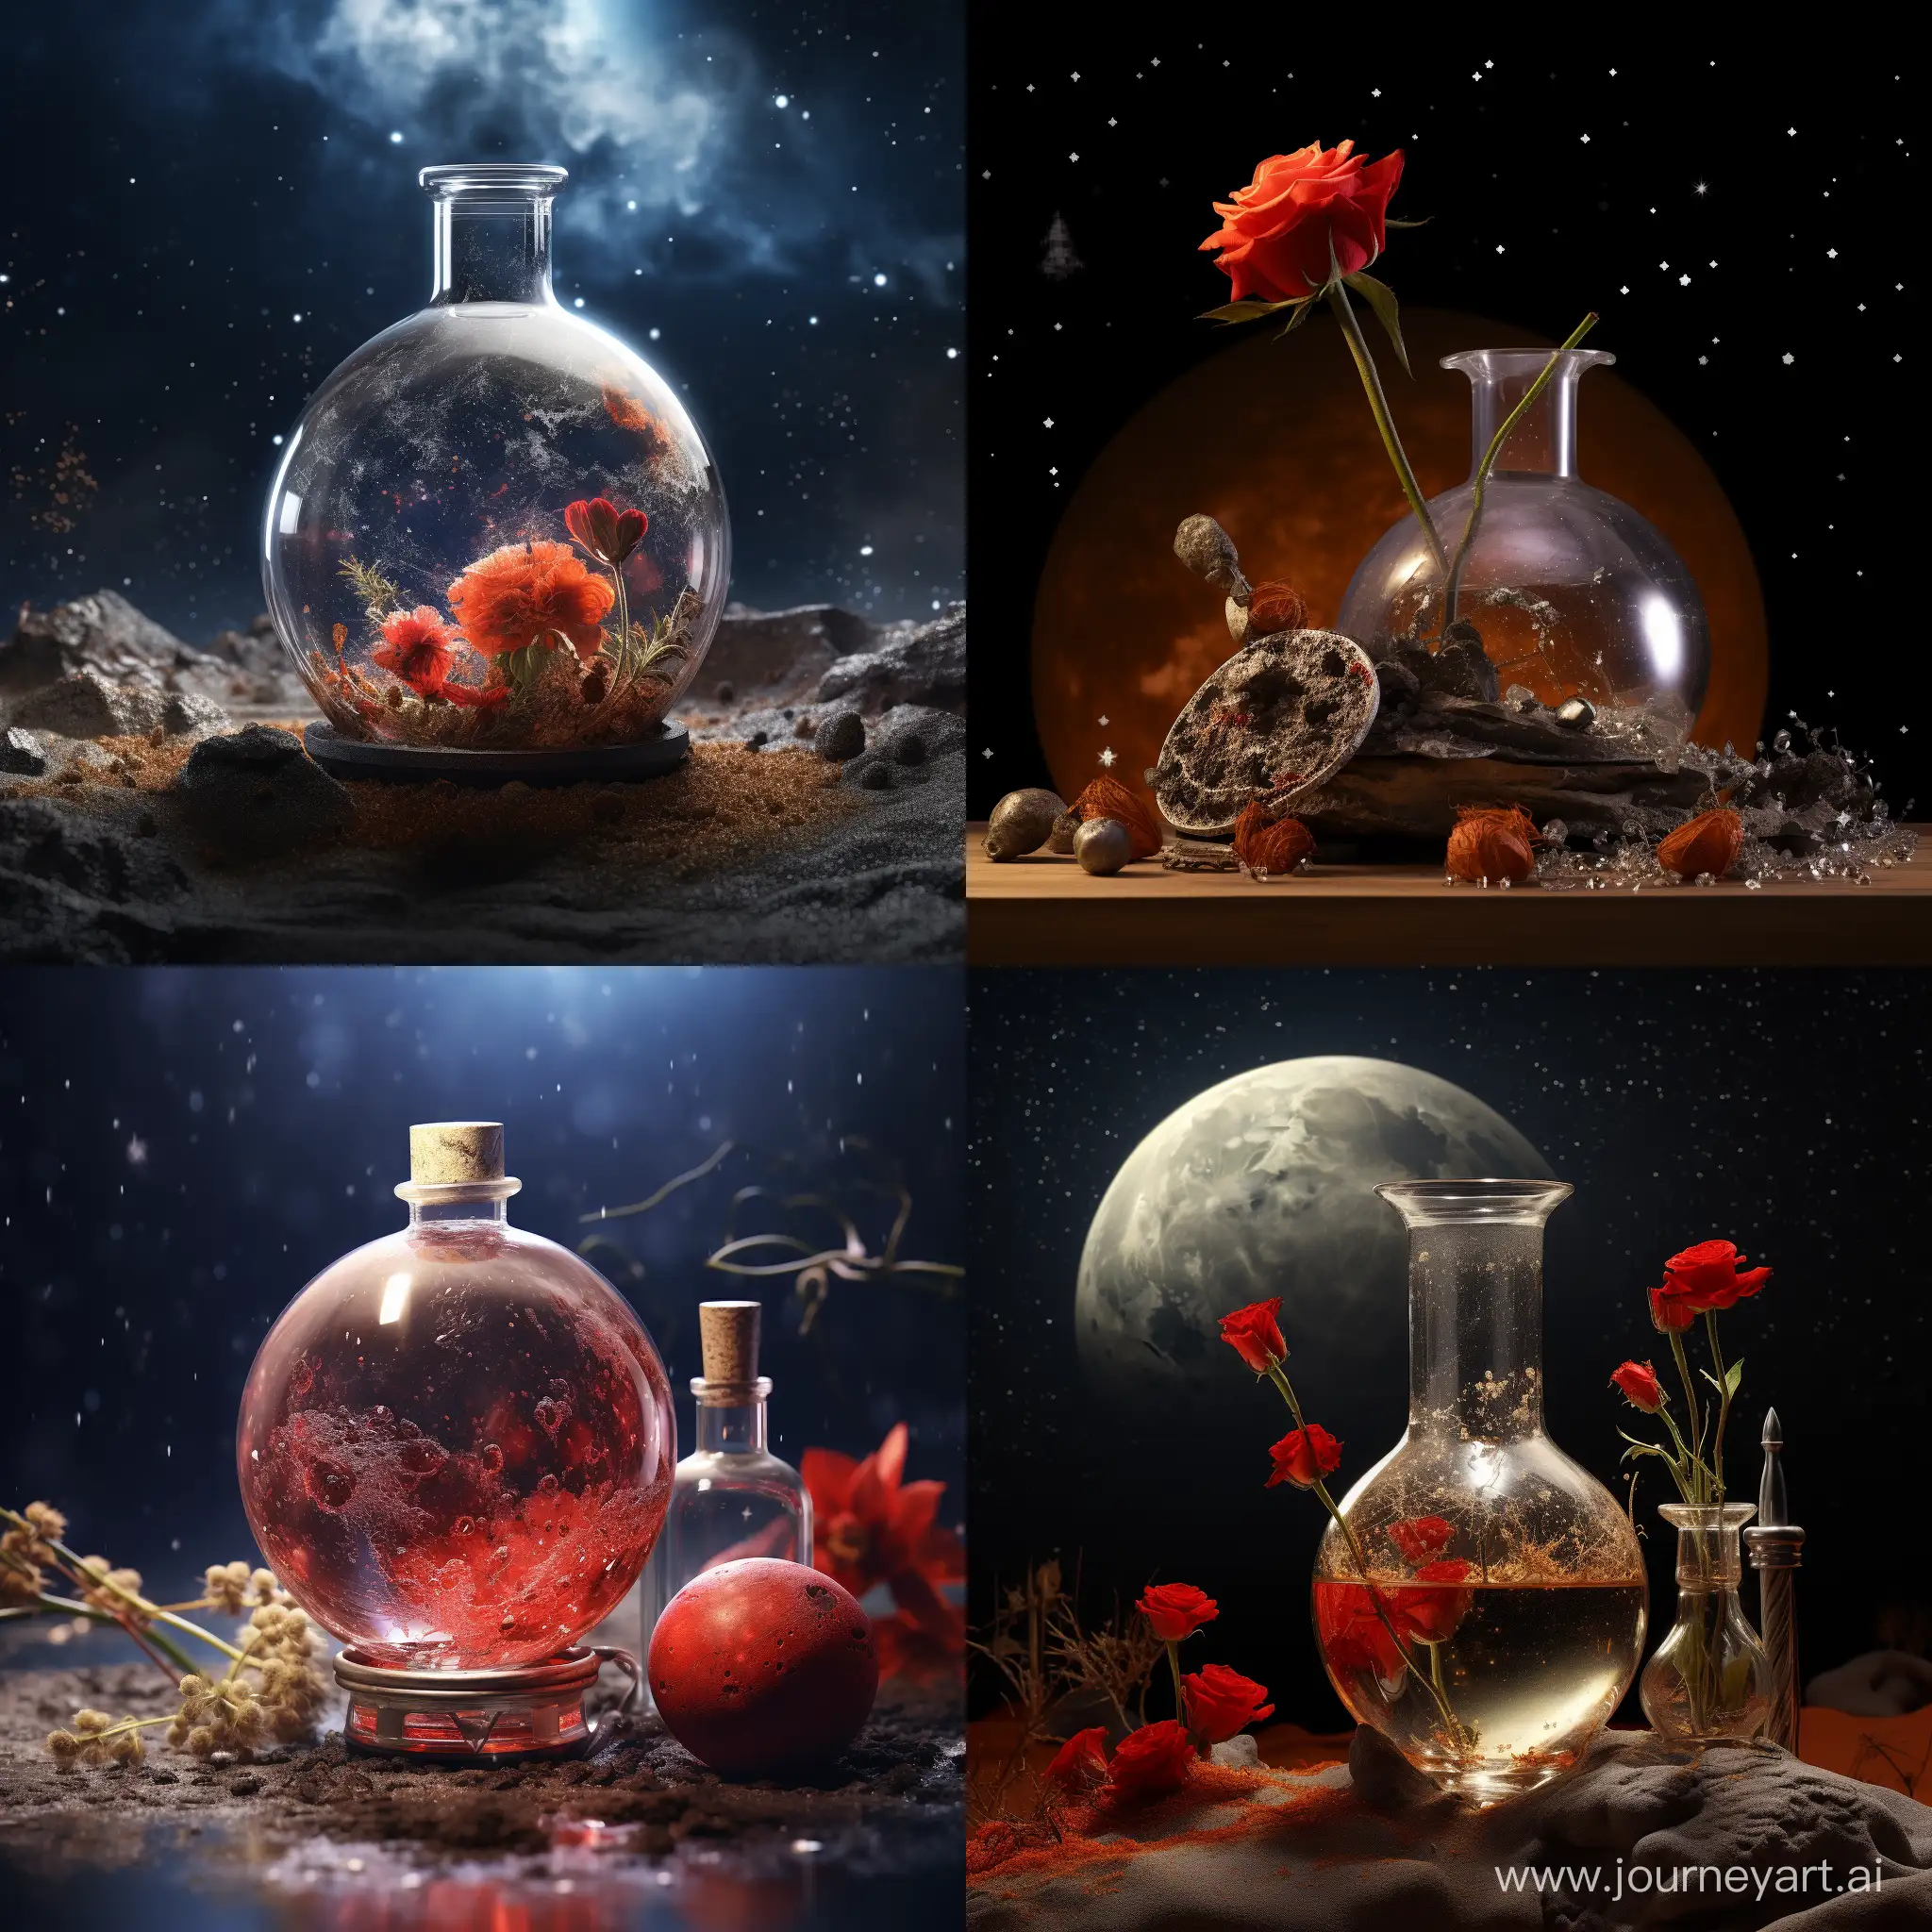 space, starspace, moon, meteorite craters on the moon, glass on the moon's surface, a beautiful red rose in a flask, a beautiful red rose in a flask, hyper-realism, 8K image quality, hyper-realism, 8K image quality, ultra detail 